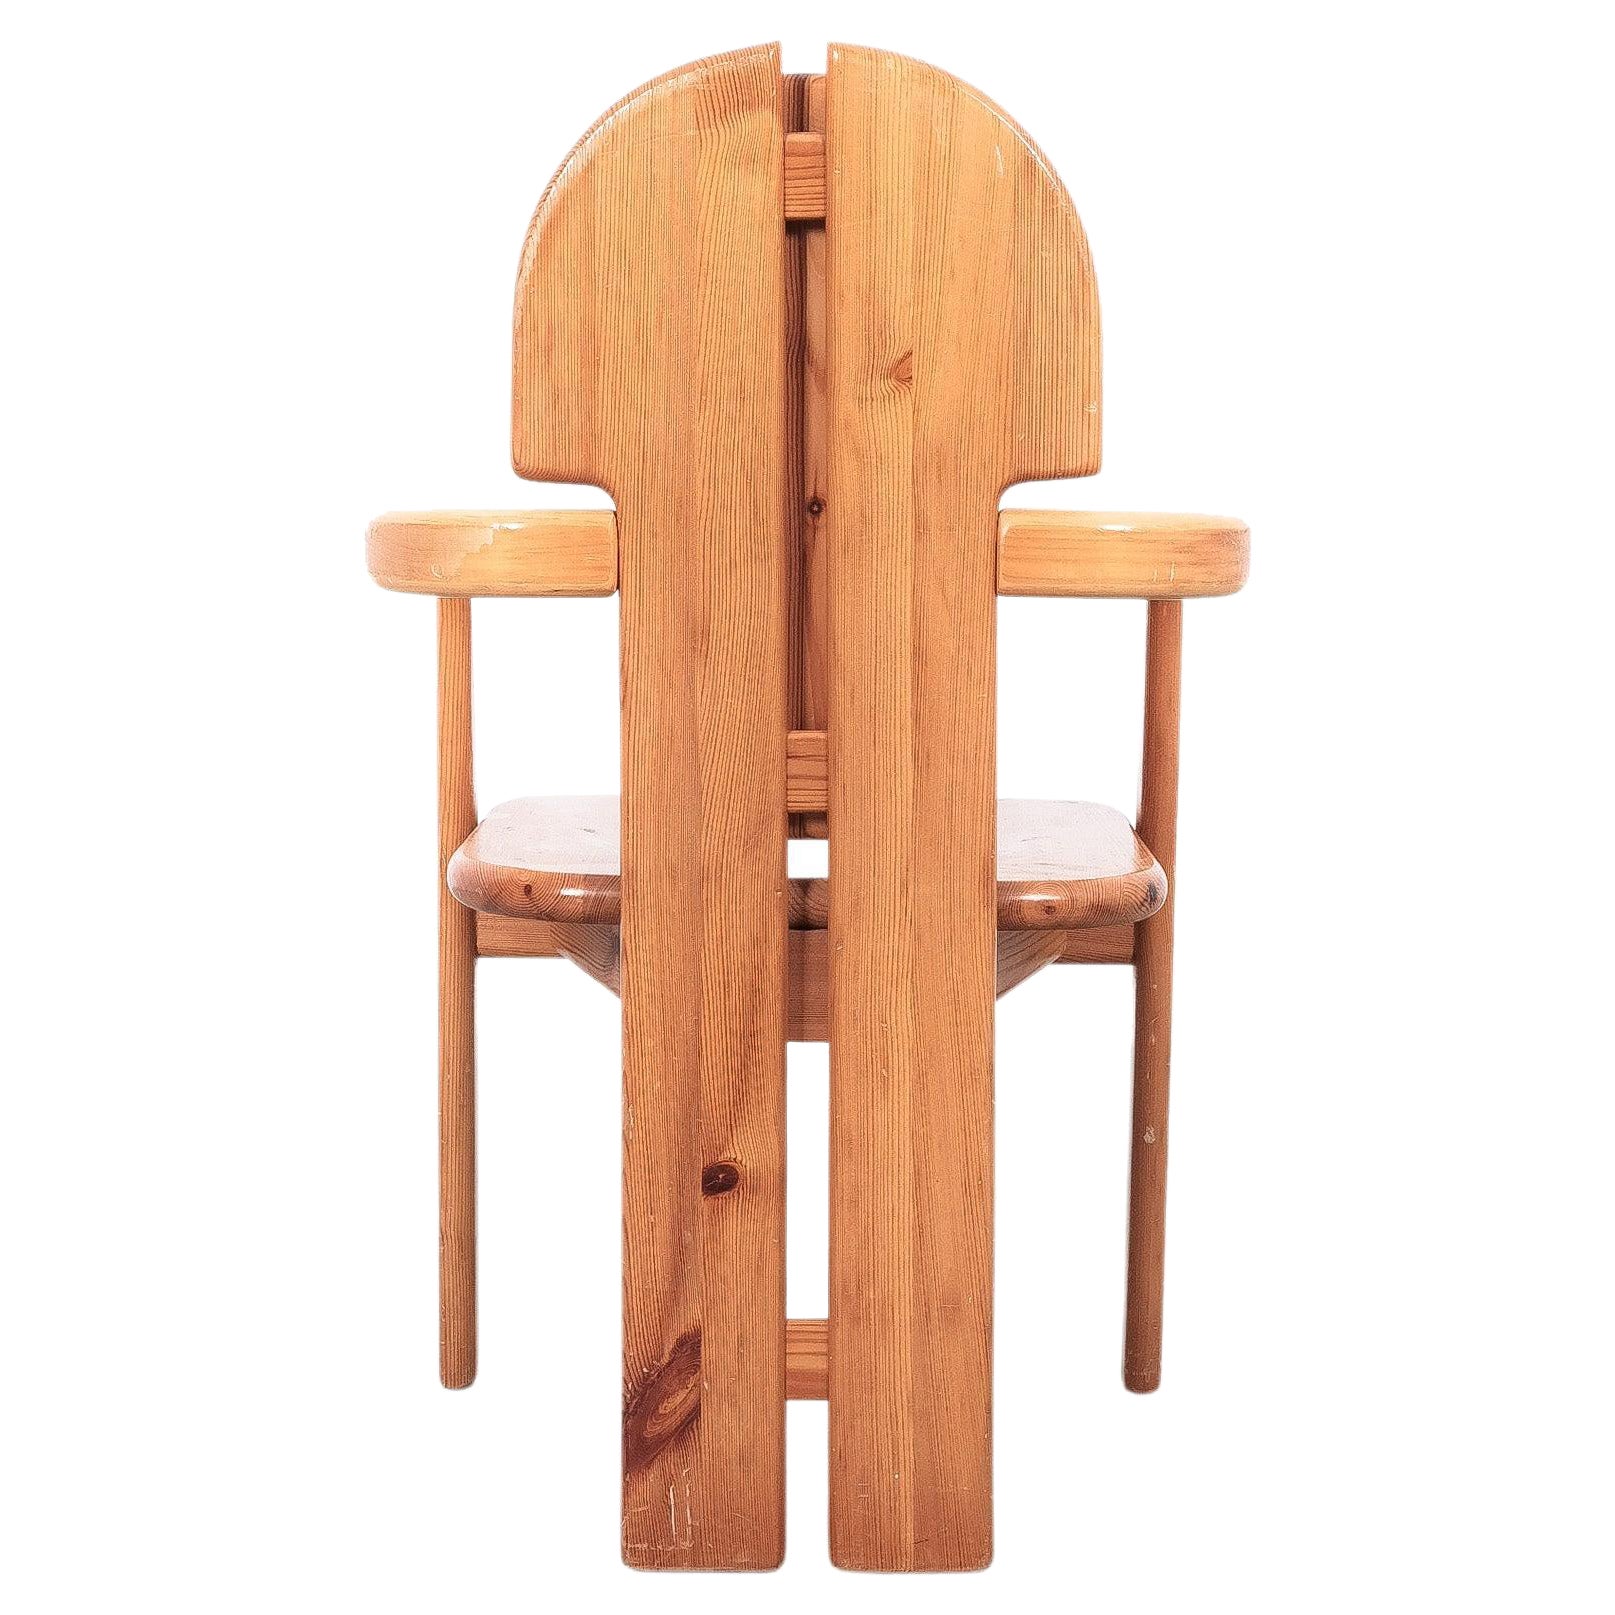 Rainer Daumiller Solid Pine Wood Dining Chairs '2' Danish Design, 1970 For Sale